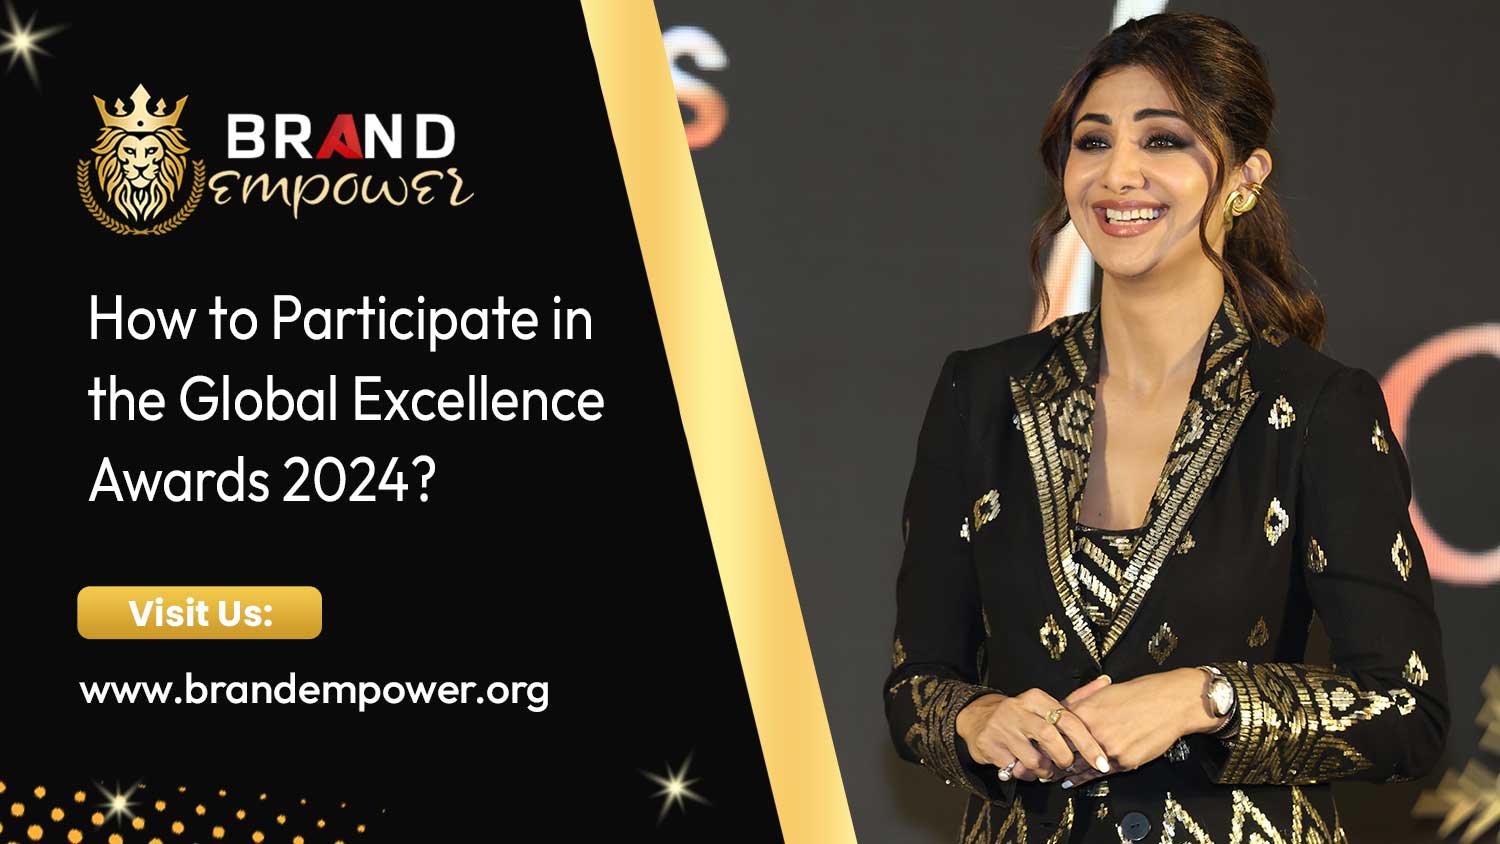 How to Participate in the Global Excellence Awards 2024